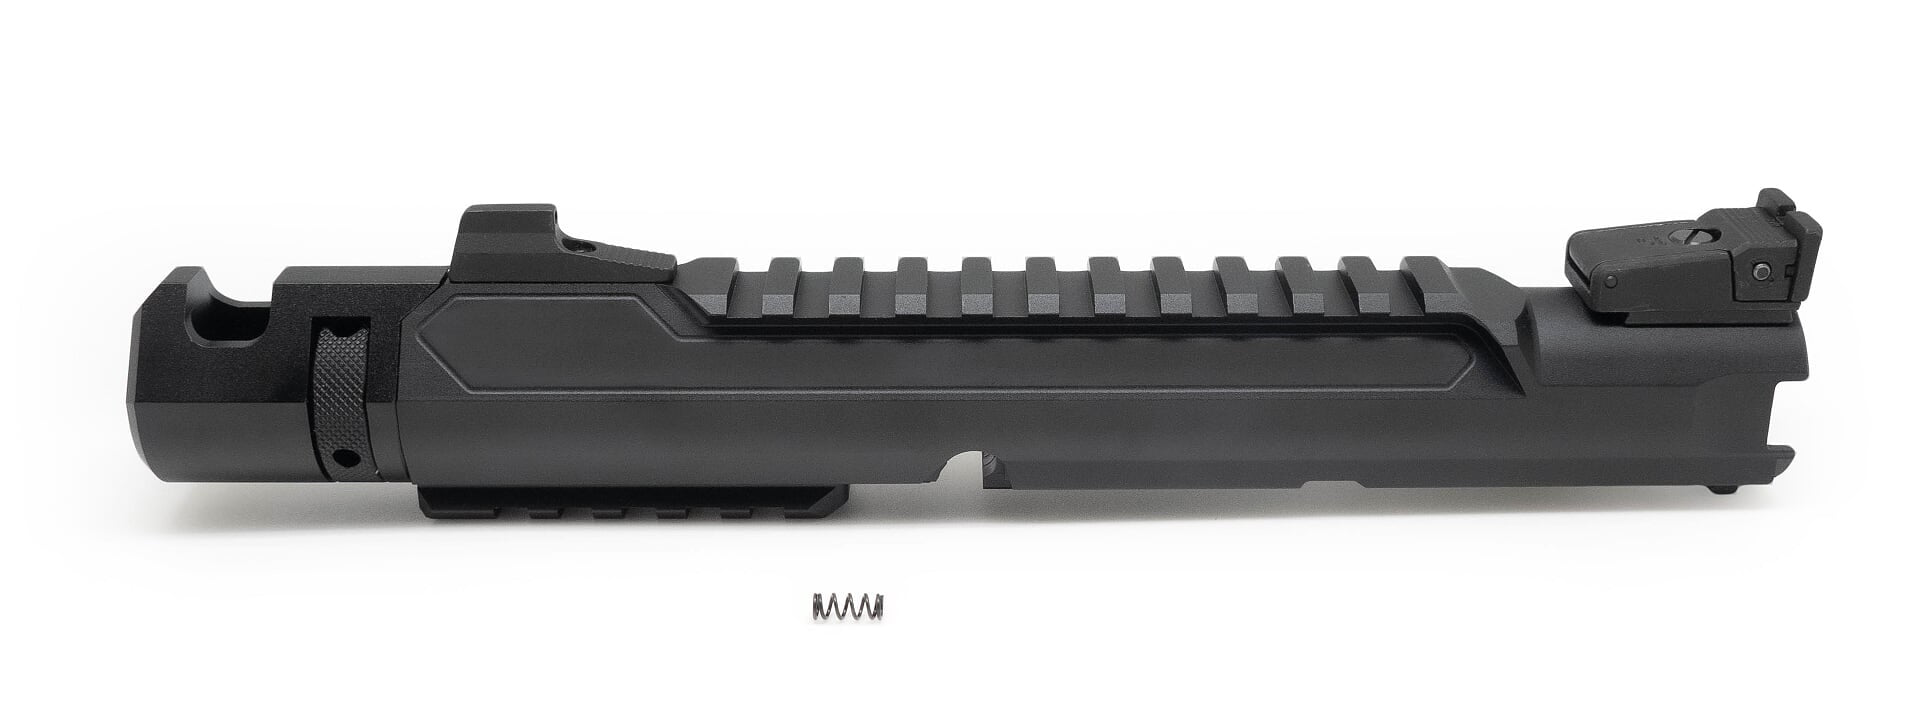 Action Army AAP01 Black Mamba CNC Upper receiver kit B